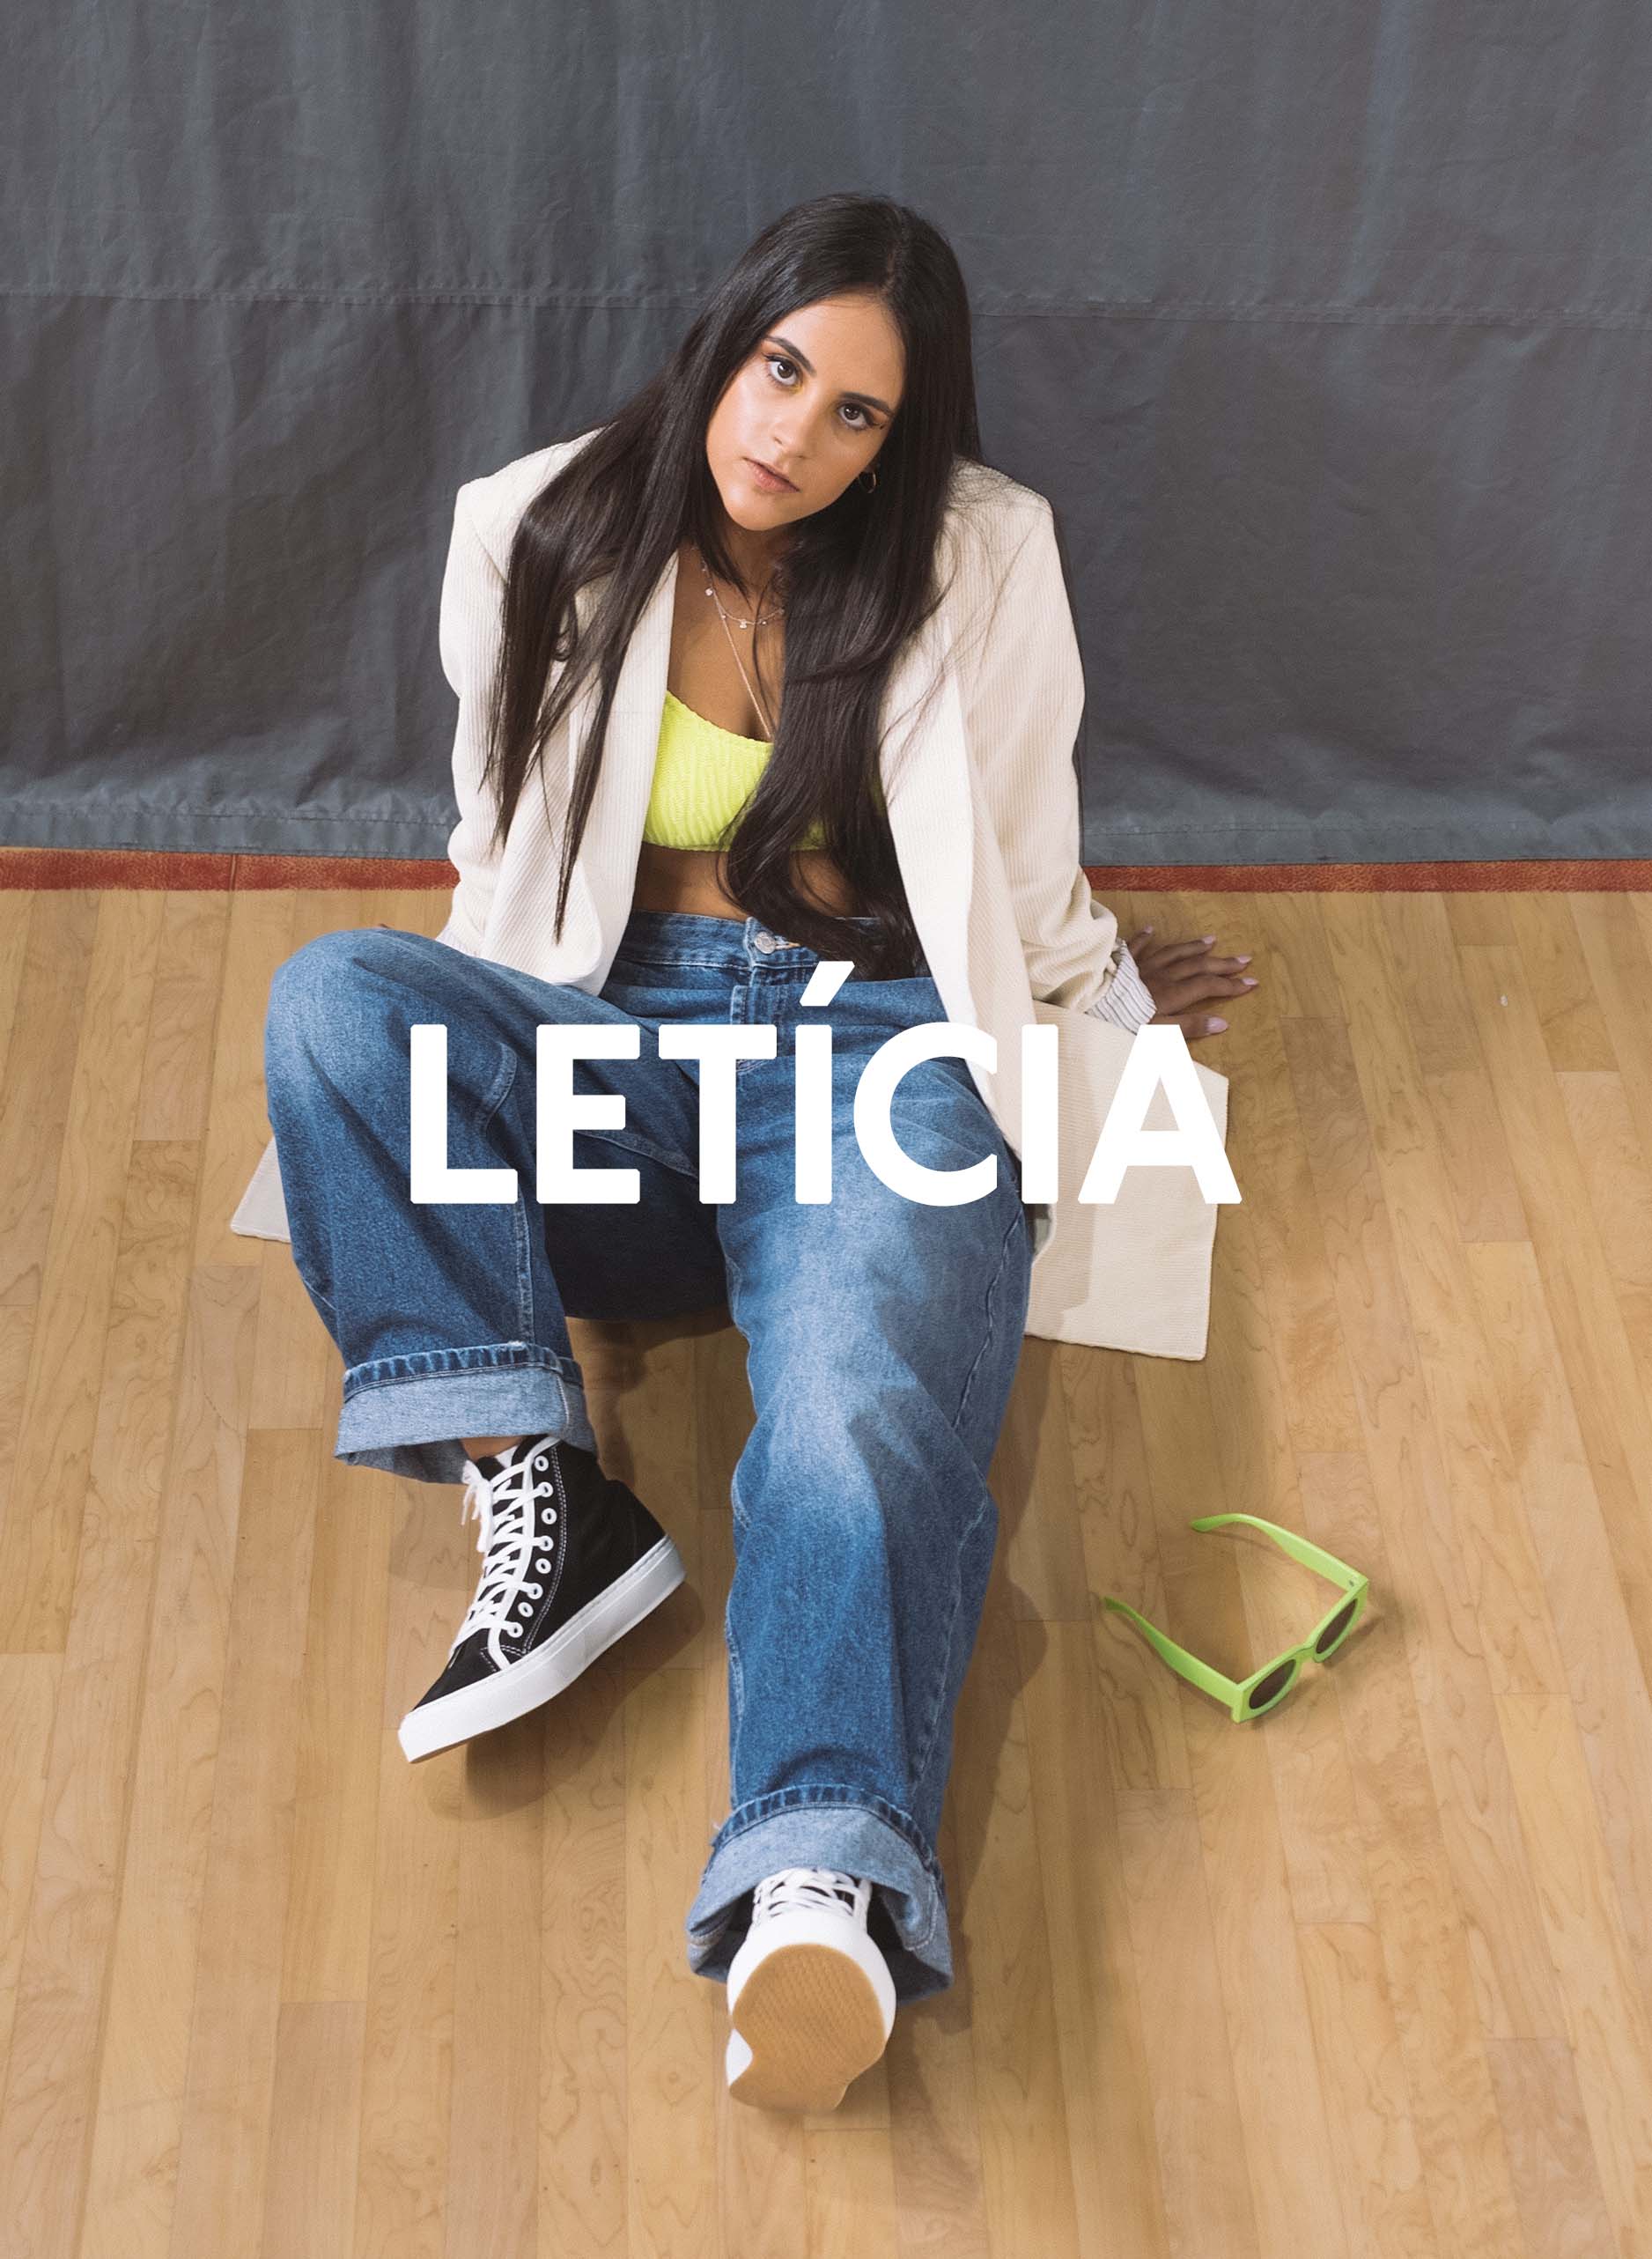 Leticia sitting on the floor of a gym looking straight at the camera, wearing Diverge sneakers, promoting social impact and custom shoes throught the imagine project. 